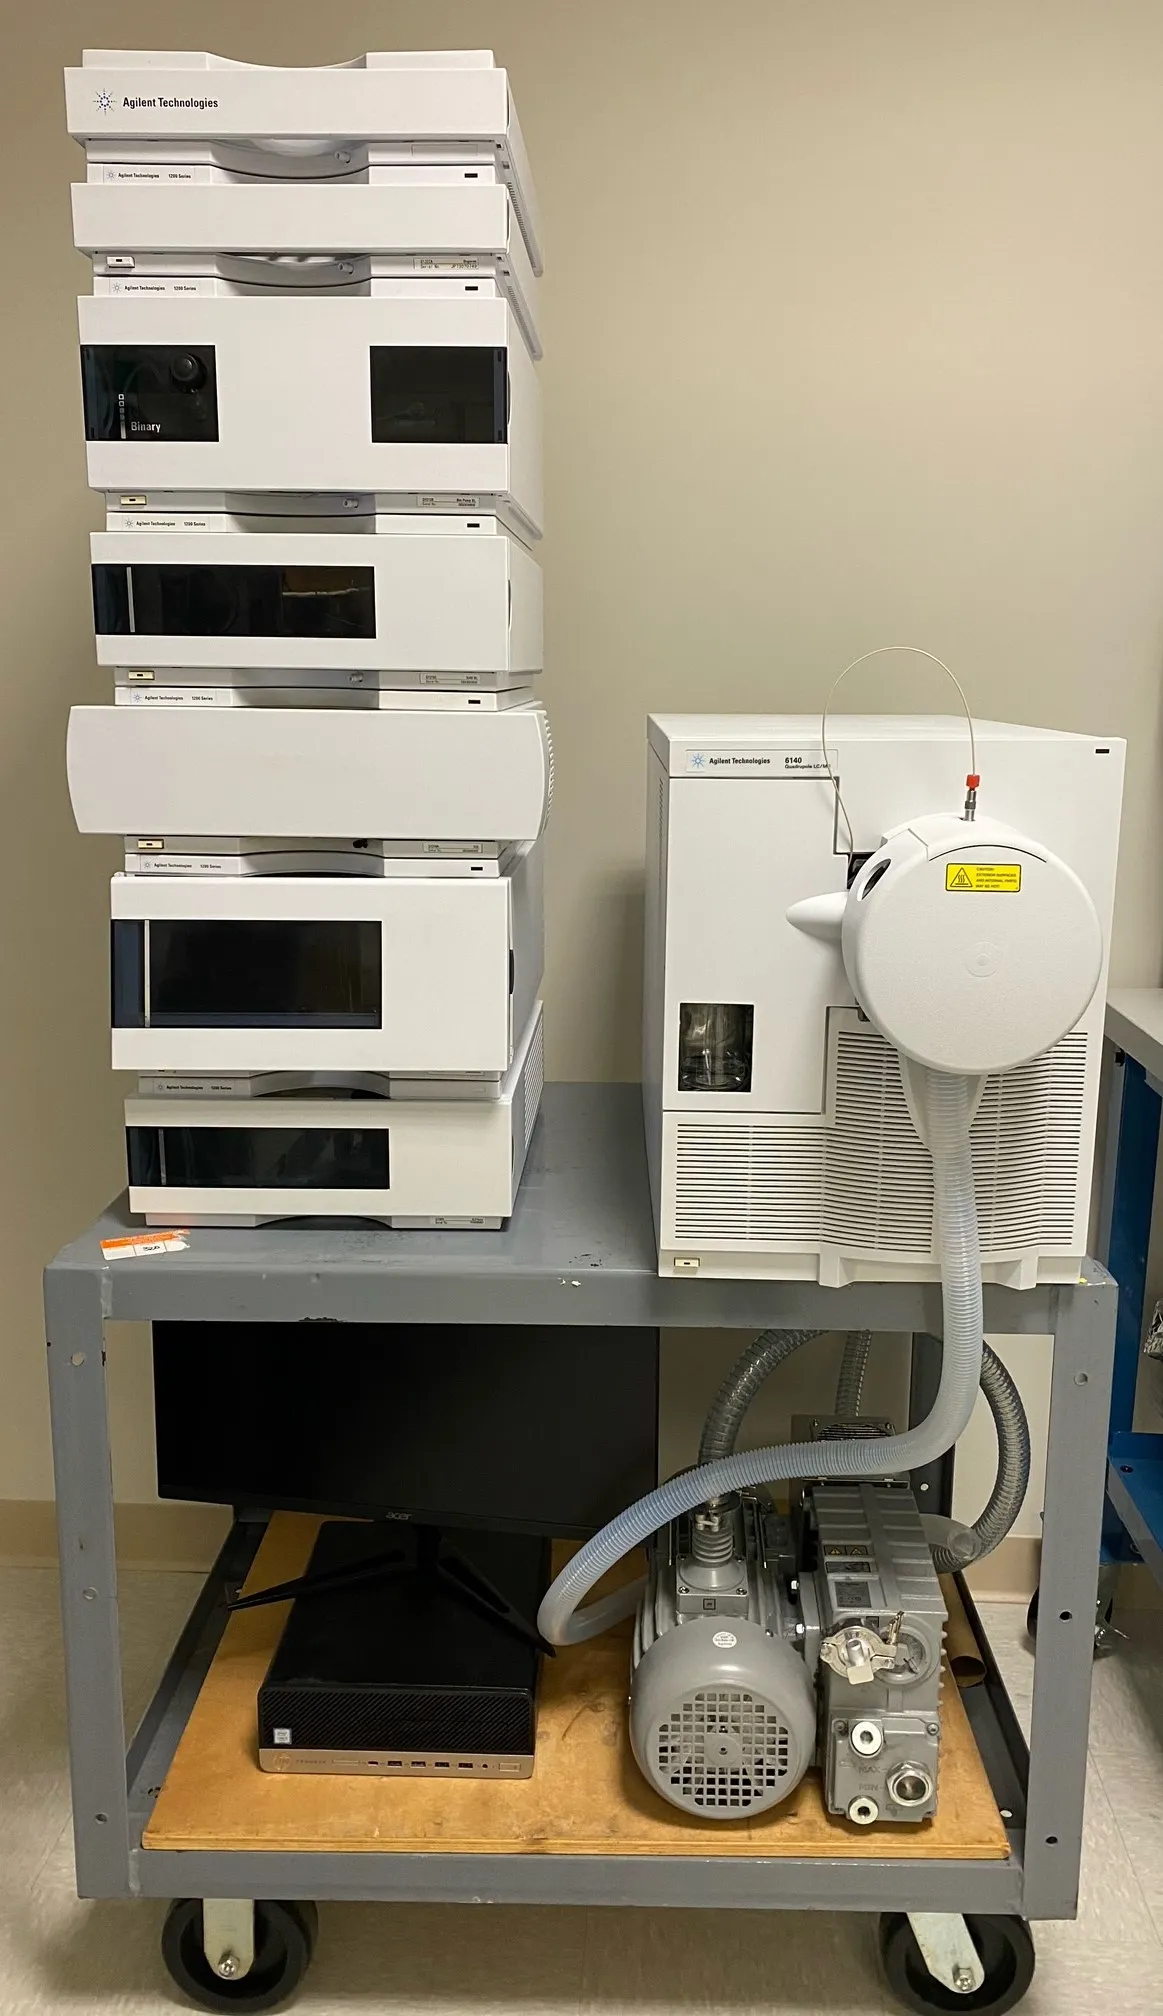 Agilent 1200 HPLC with G6140A SQ Mass Spectrometer